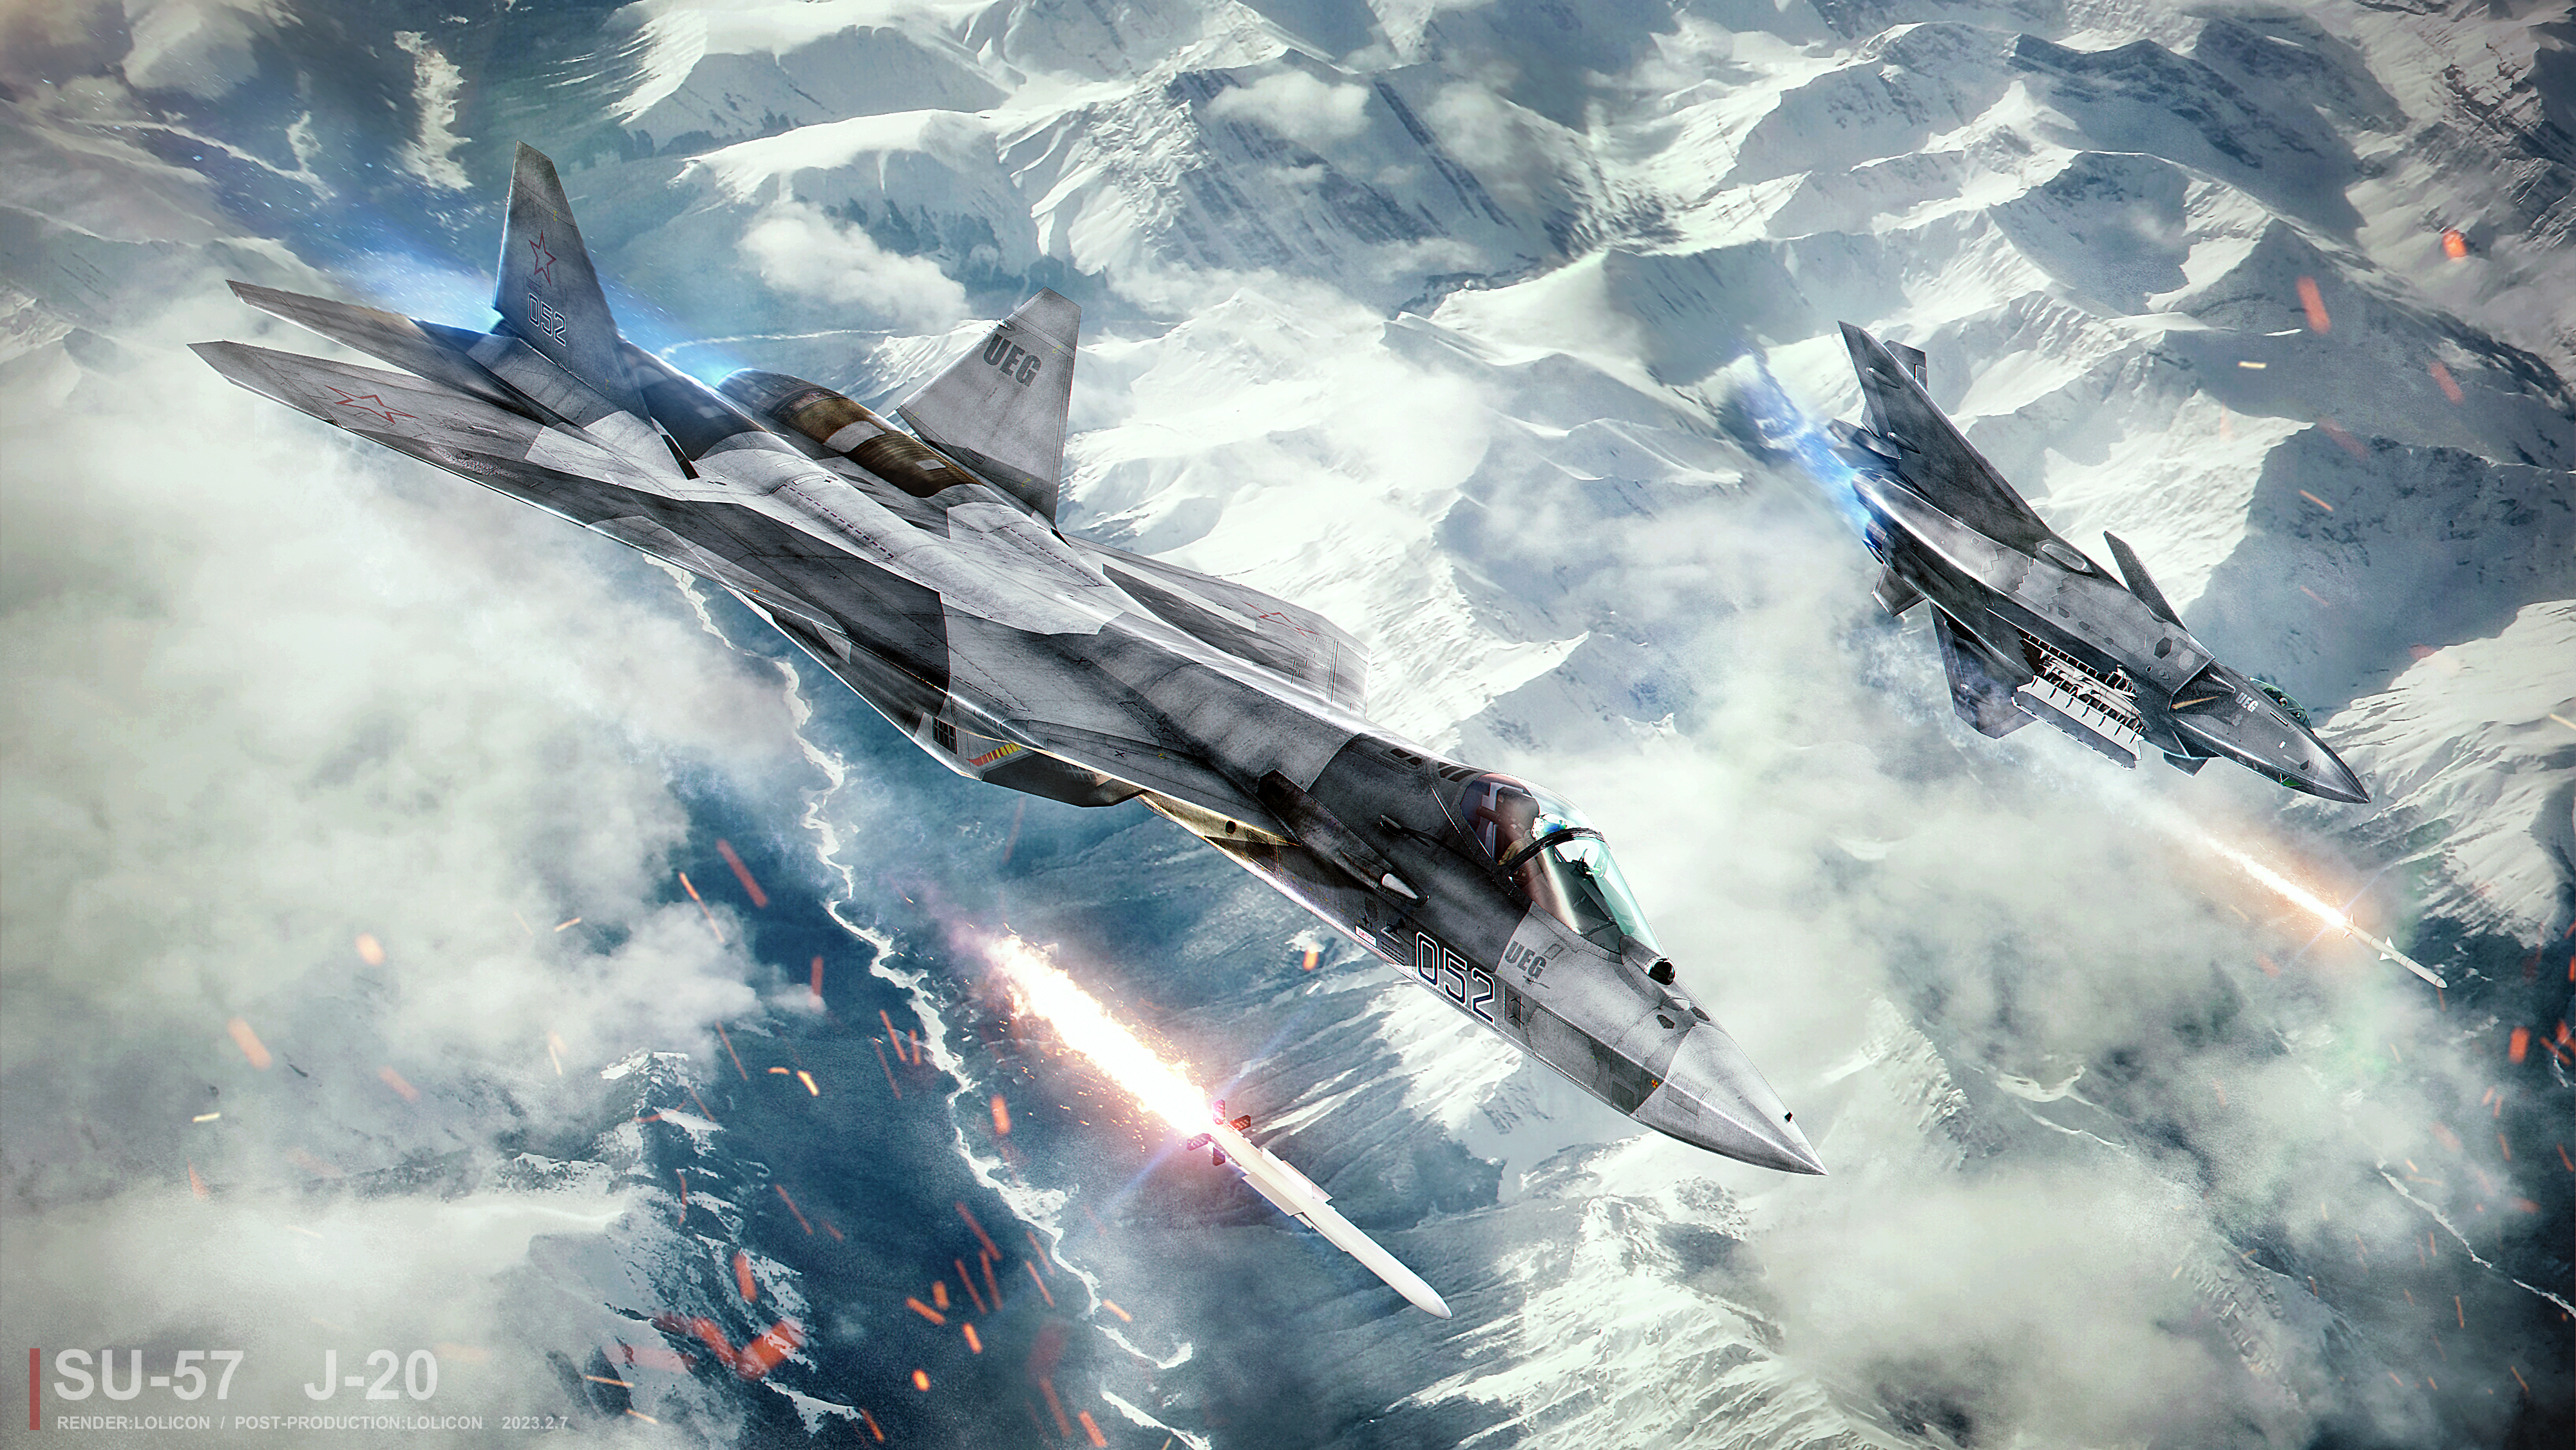 General 4000x2252 Sukhoi Su-57 Russian Air Force Russian/Soviet aircraft military CGI artwork mountains White Mountains jet fighter UEG Sukhoi Chengdu J-20 Chinese aircraft